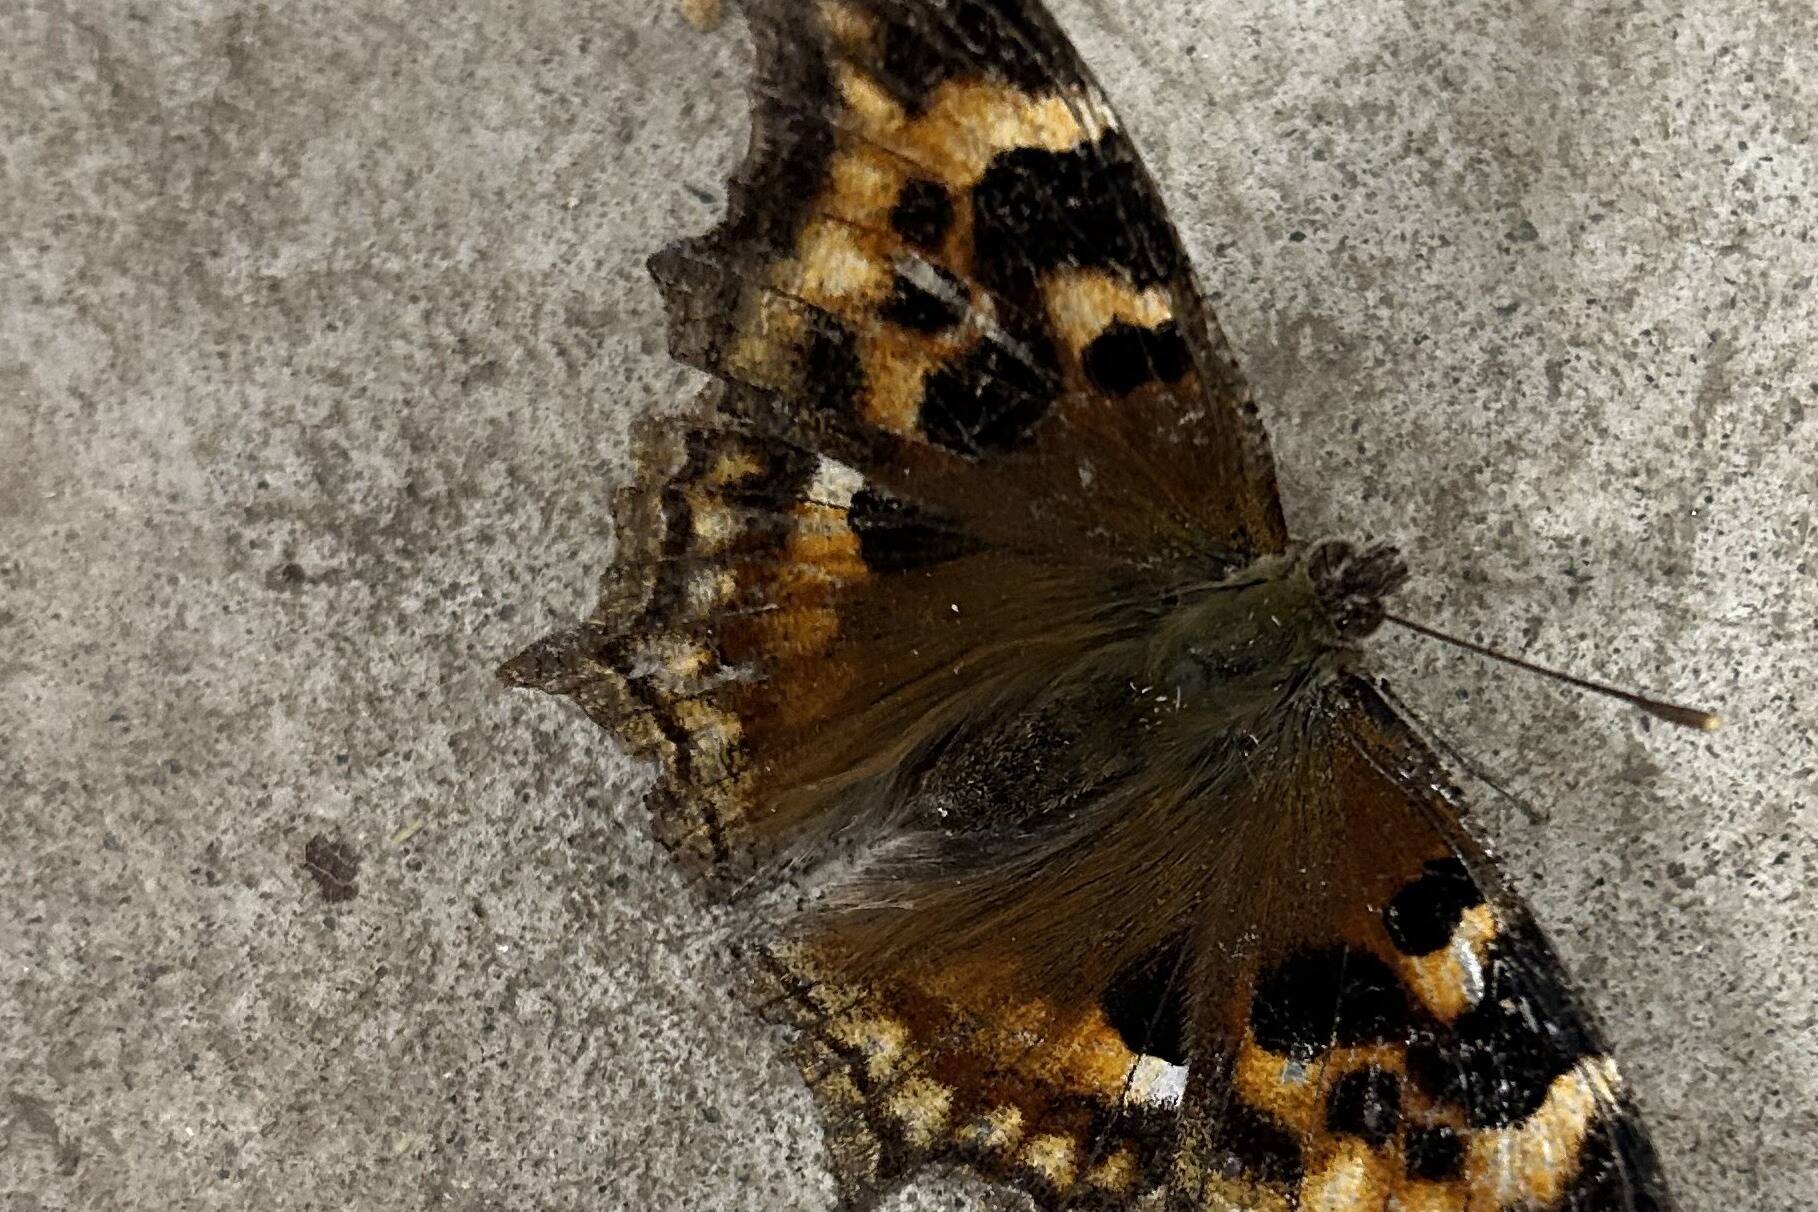 A Compton tortoiseshell butterfly pauses between flights in Two Rivers resident Rod Boyce’s garage in January 2023. Photo by Rod Boyce.